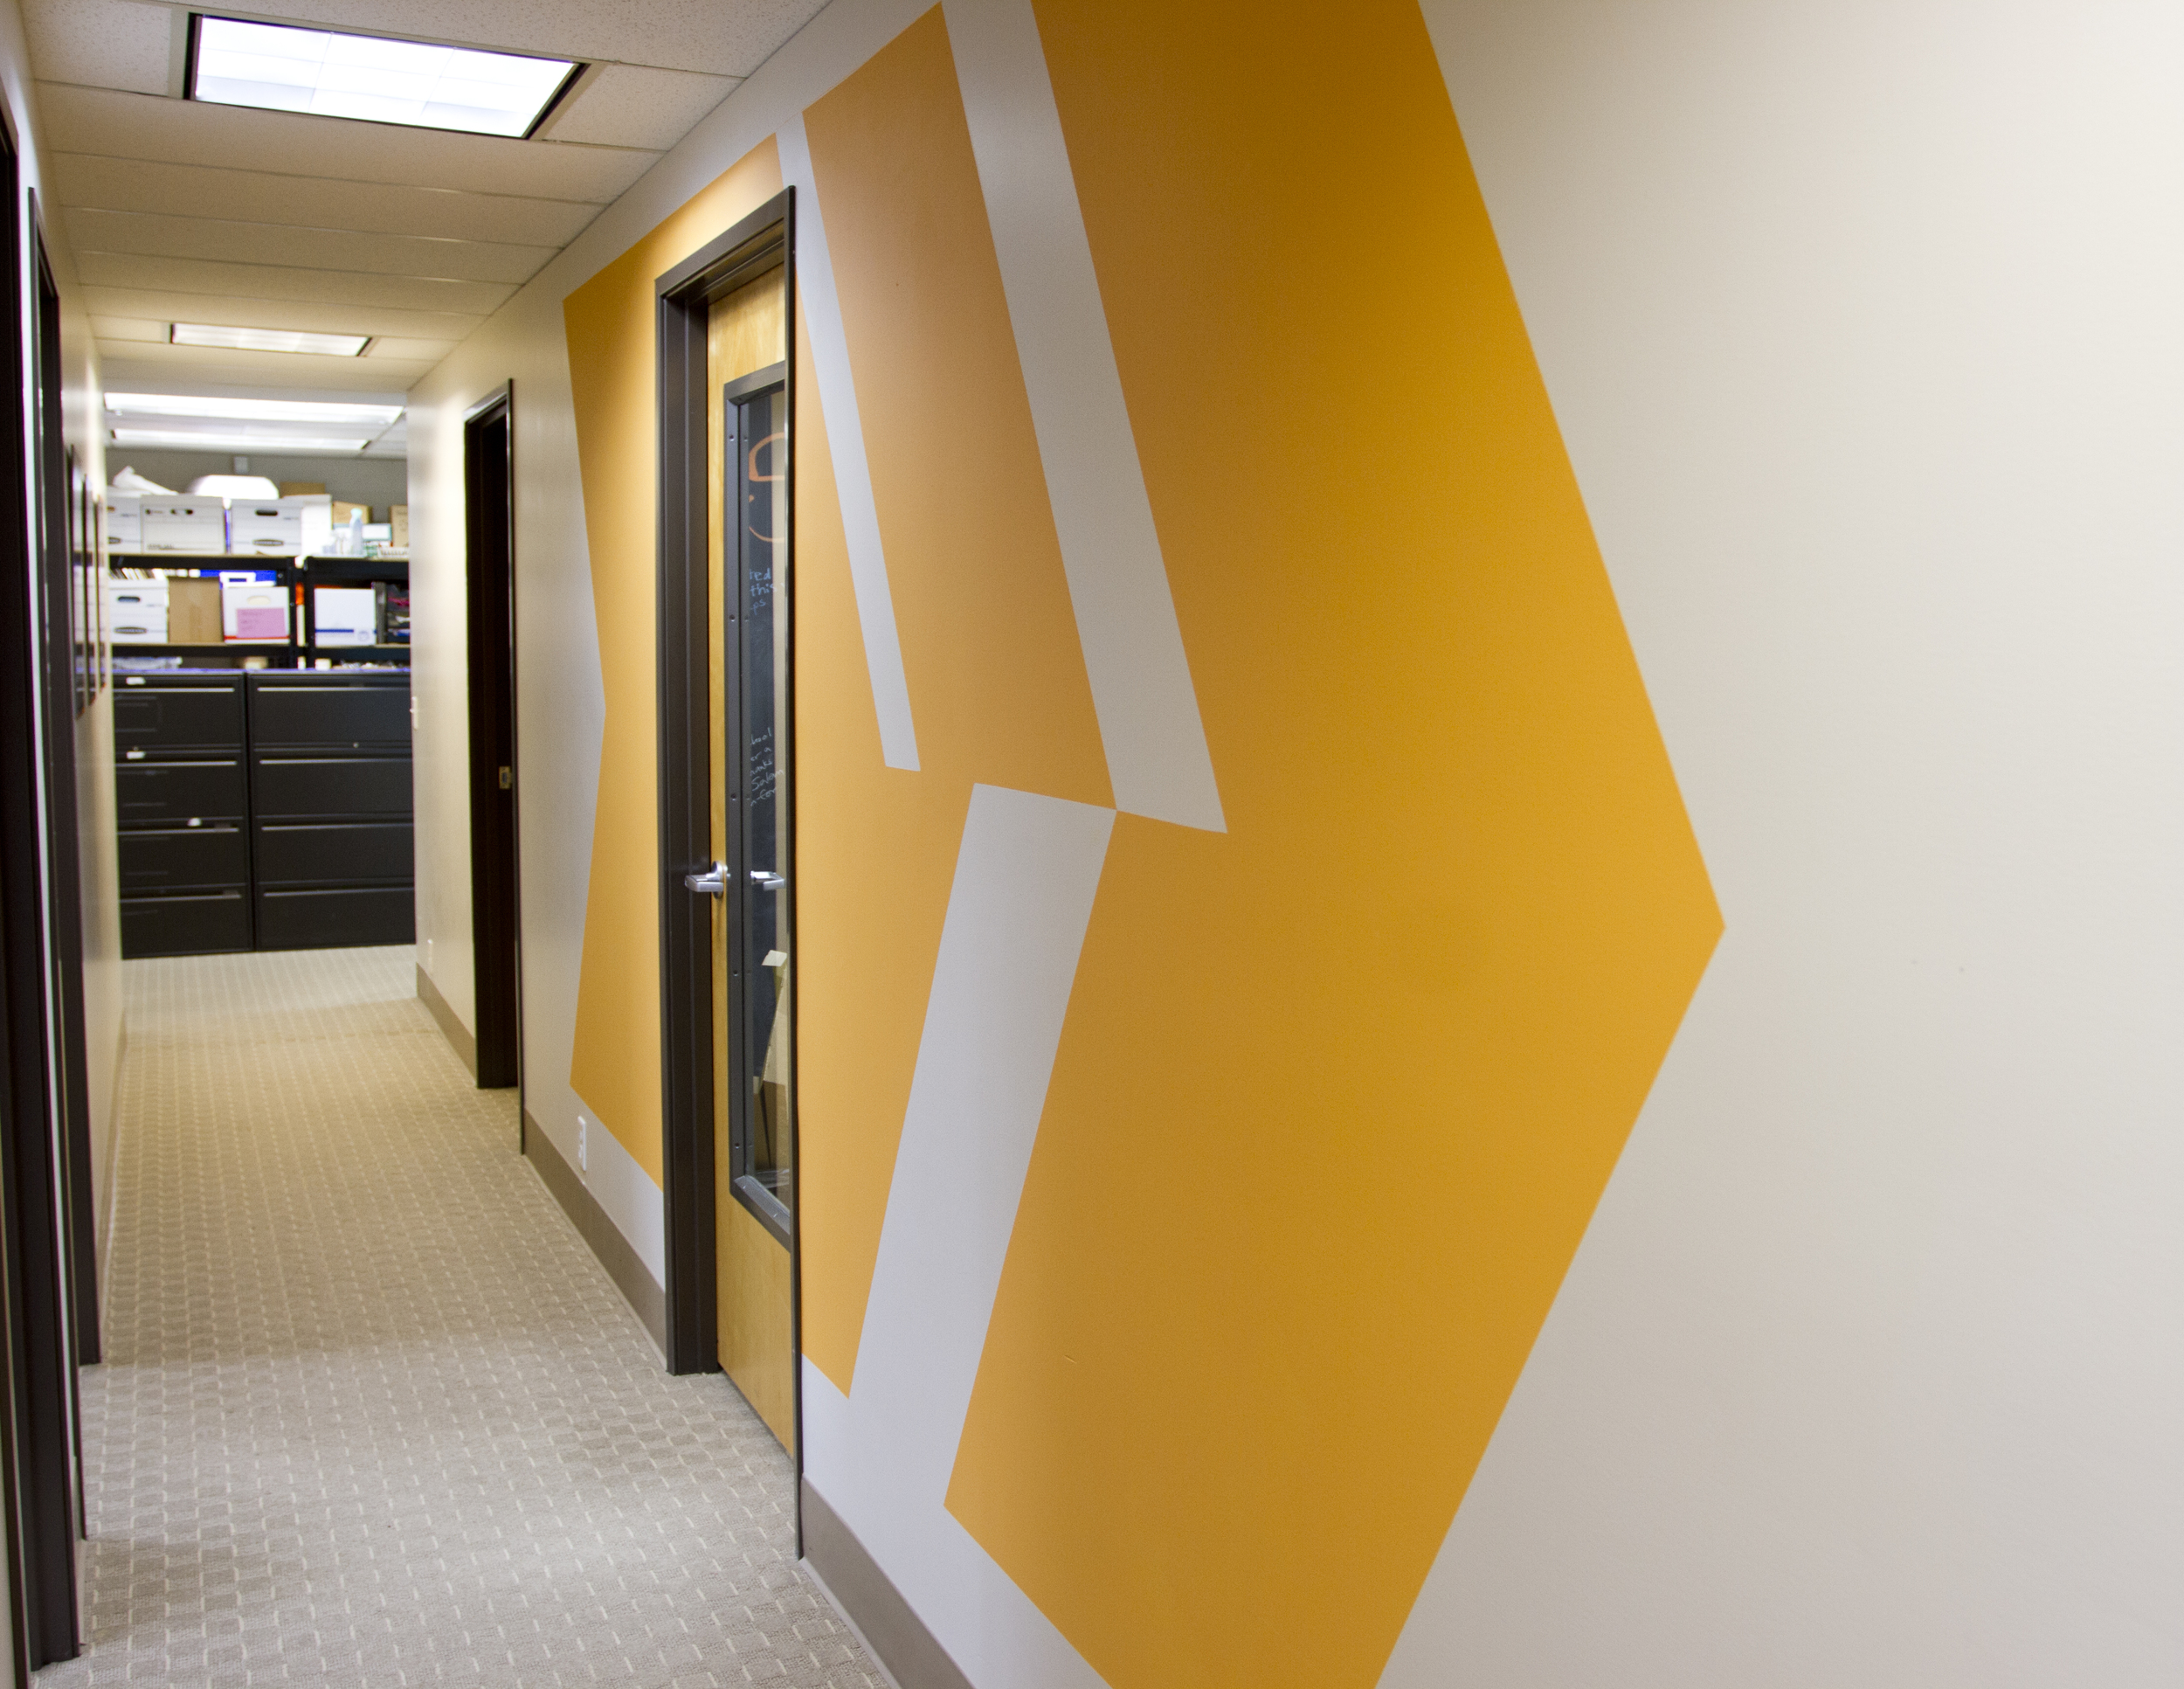  After: we used color blocks to help engage users as they move around the space. &nbsp; 